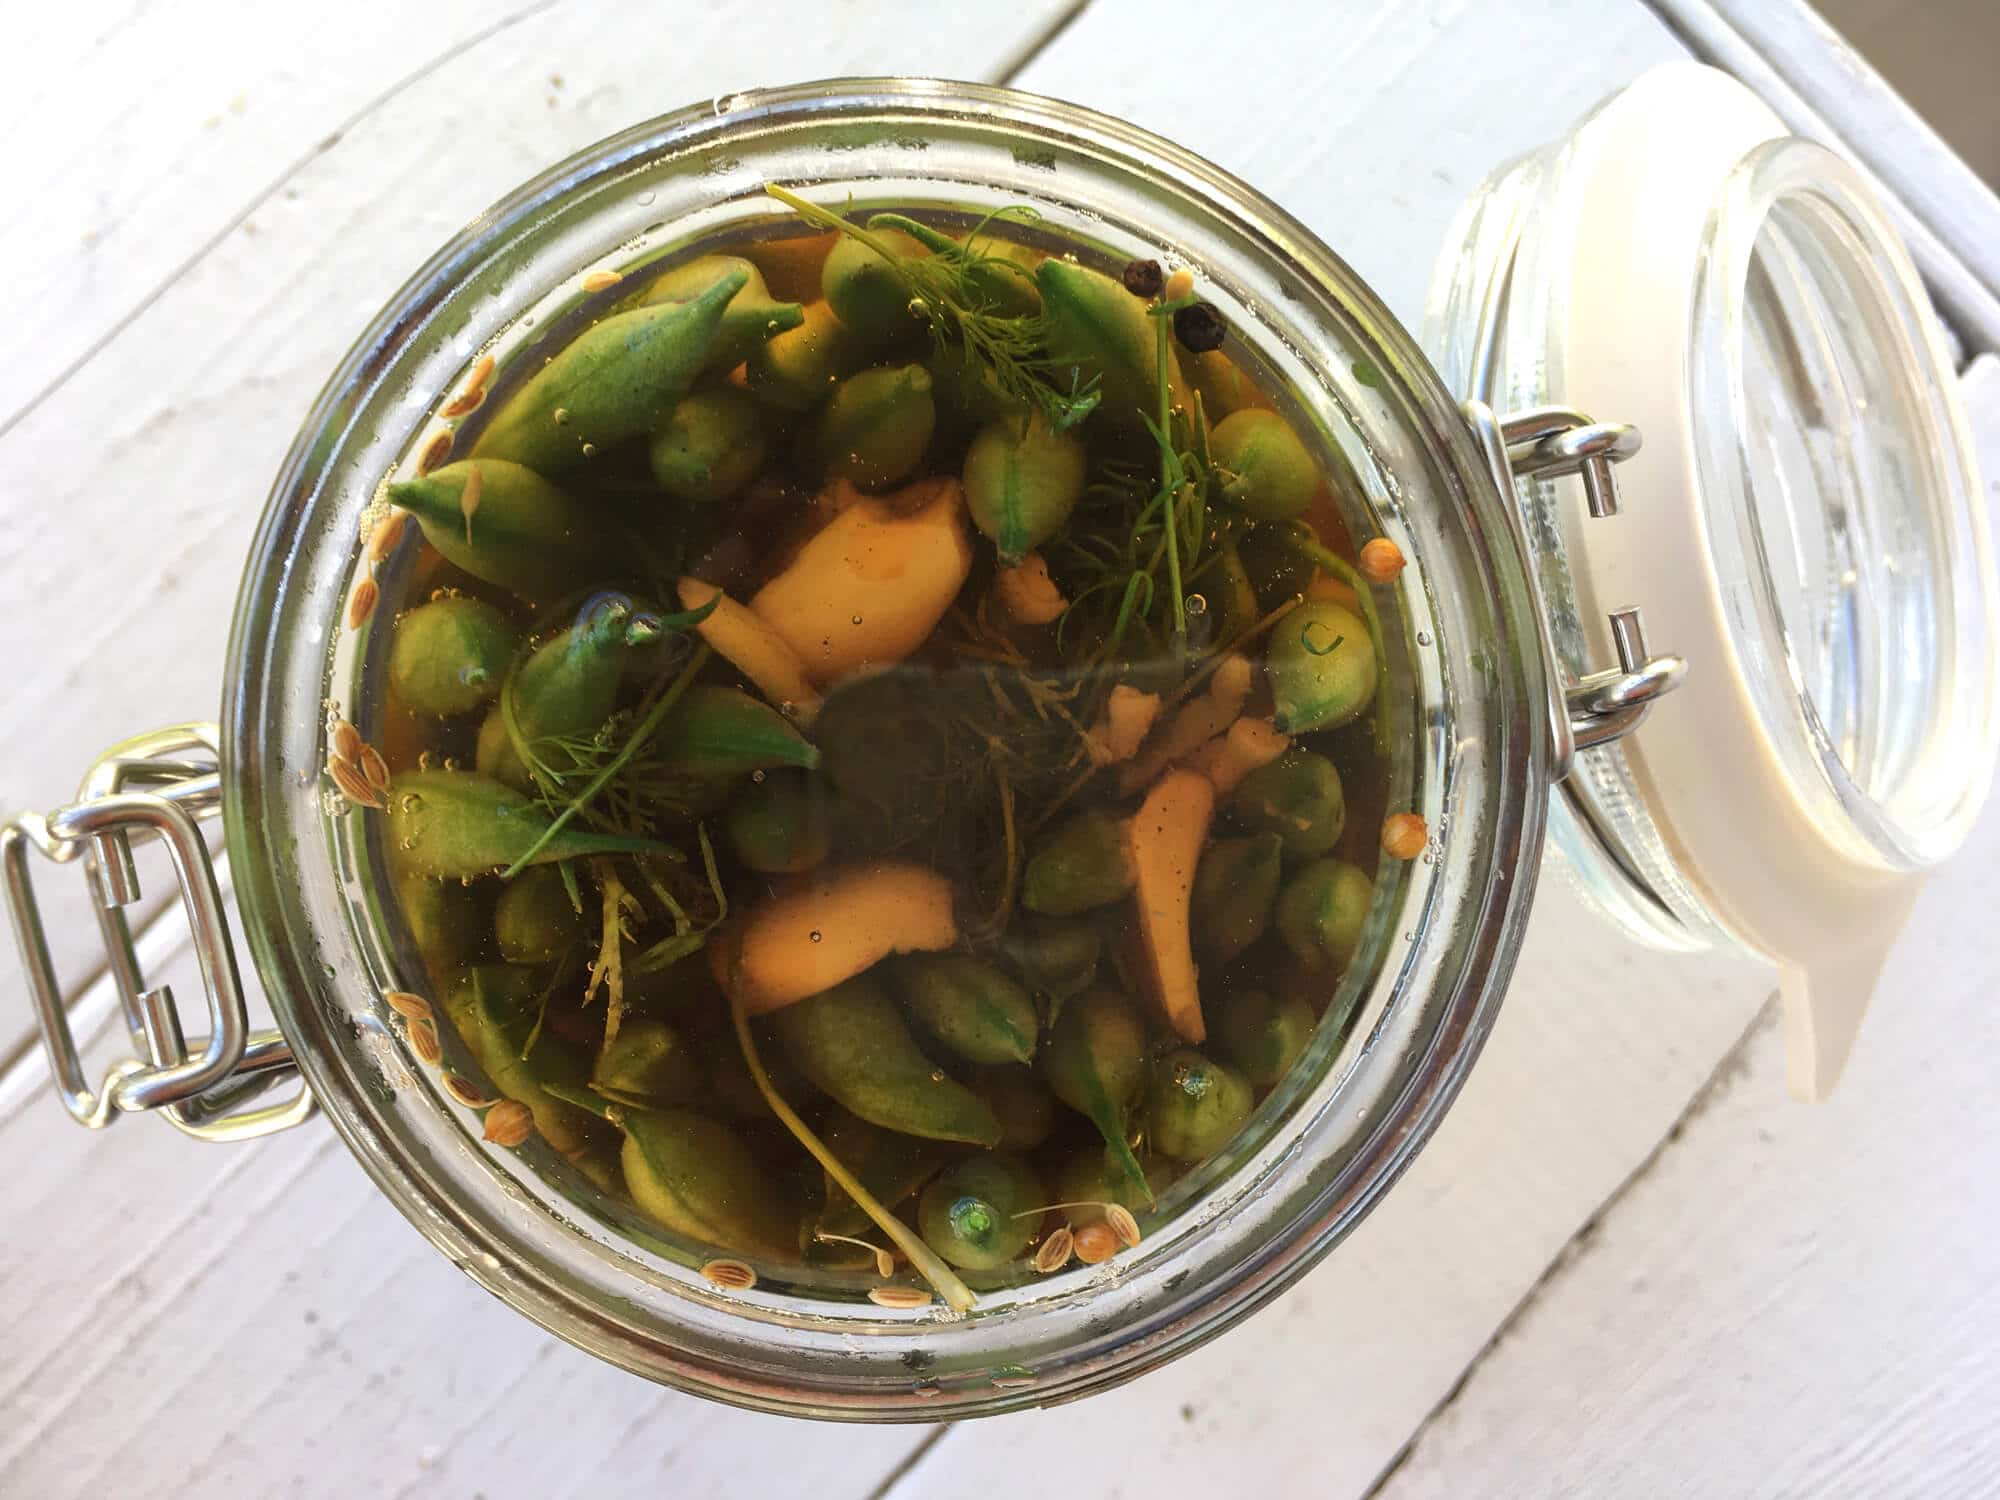 dill pickled green beans dilly beans recipe pickling canning preserving